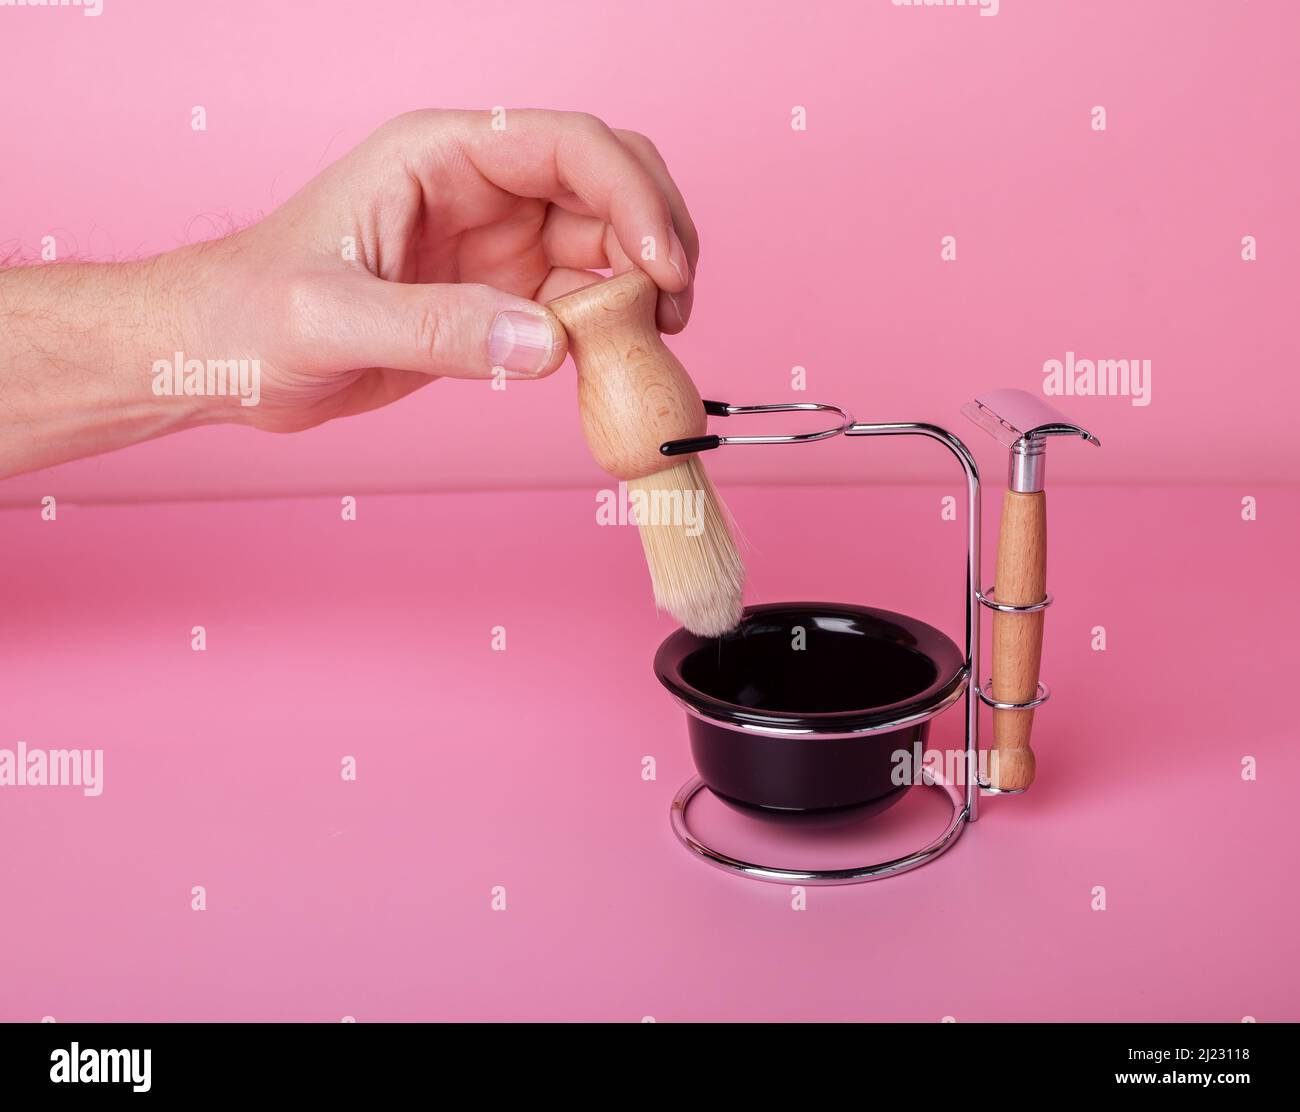 Man hand holding shaving brush. Grooming set, razor, cup for foam on pink background. Hygiene and face care concept. High quality photo Stock Photo